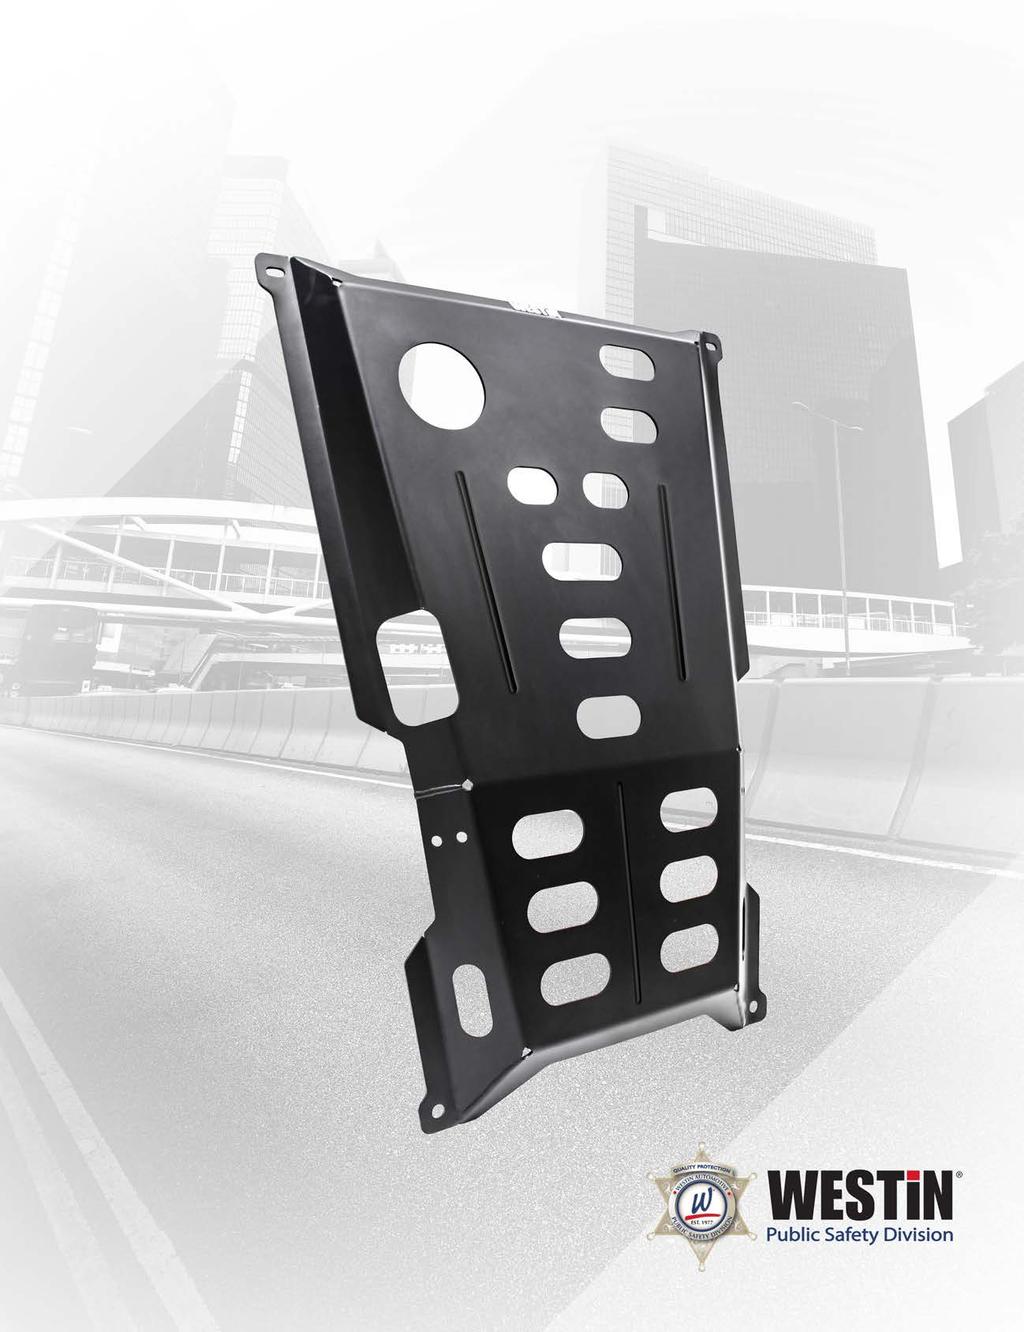 SKID PLATE Westin s Skid Plate is made of heavy duty 10 gauge HRPO steel with the strength to fully protect the under body of the vehicle.